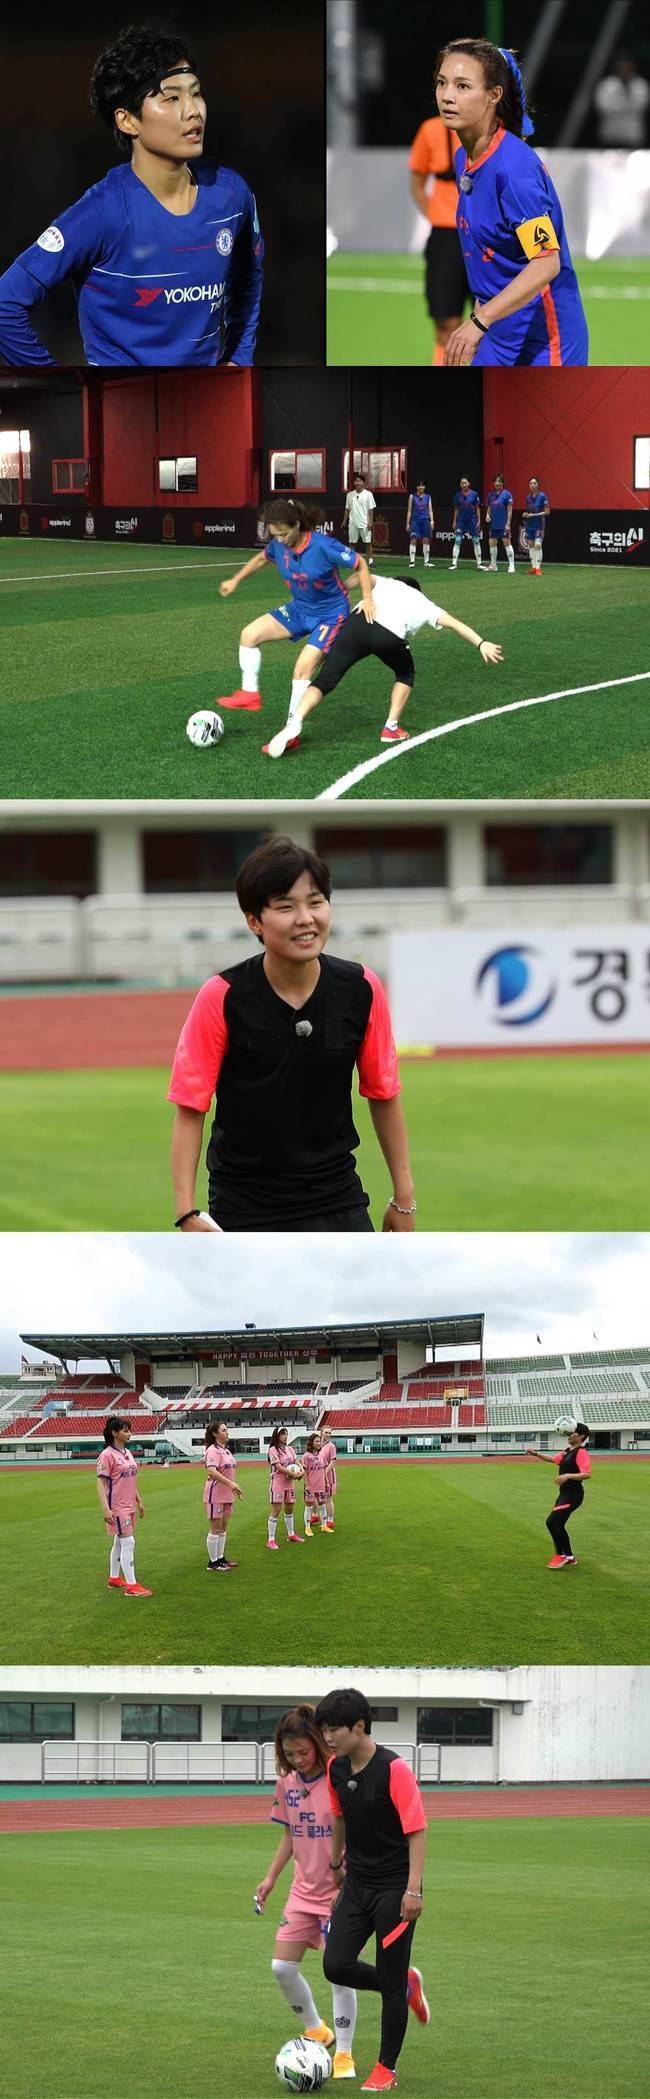 The Korean womens soccer legend Ji So-yun plays a one-on-one match with Park Sun-young.Ji So-yun appears as a daily Kochi in SBS Goal Striking Girls, which is broadcast on August 18th.Ji So-yun was the first person to meet the goal girls players as it is the myth of womens soccer.In response, she claimed to be Kochi a day at the practice site of Bolgeum.Ji So-yun, who took off to improve the skills of the four teams who entered the tournament, proved the worlds strongest dignity by showing fantastic shooting and accurate pass as if he were playing before the full-scale coaching.In addition, he handed over customized one-point lessons for each team to useful honey tips for practical use, and he was always impressed by the players of Goal Women.In coaching the strong champion FC Bull Moth, there was also a one-on-one confrontation between Ace Park Sun-young and Ji So-yun.Ji So-yun showed a relaxed appearance at the beginning, but was surprised and embarrassed by the appearance of Park Sun-young, who even shot through himself with a brilliant dribble.Also, when the attack pattern was blocked by Park Sun-youngs defense of the iron wall, Ji So-yun shouted I am motivated and One more time! And laughed and laughed and surprised the scene by showing the real absolute figure.